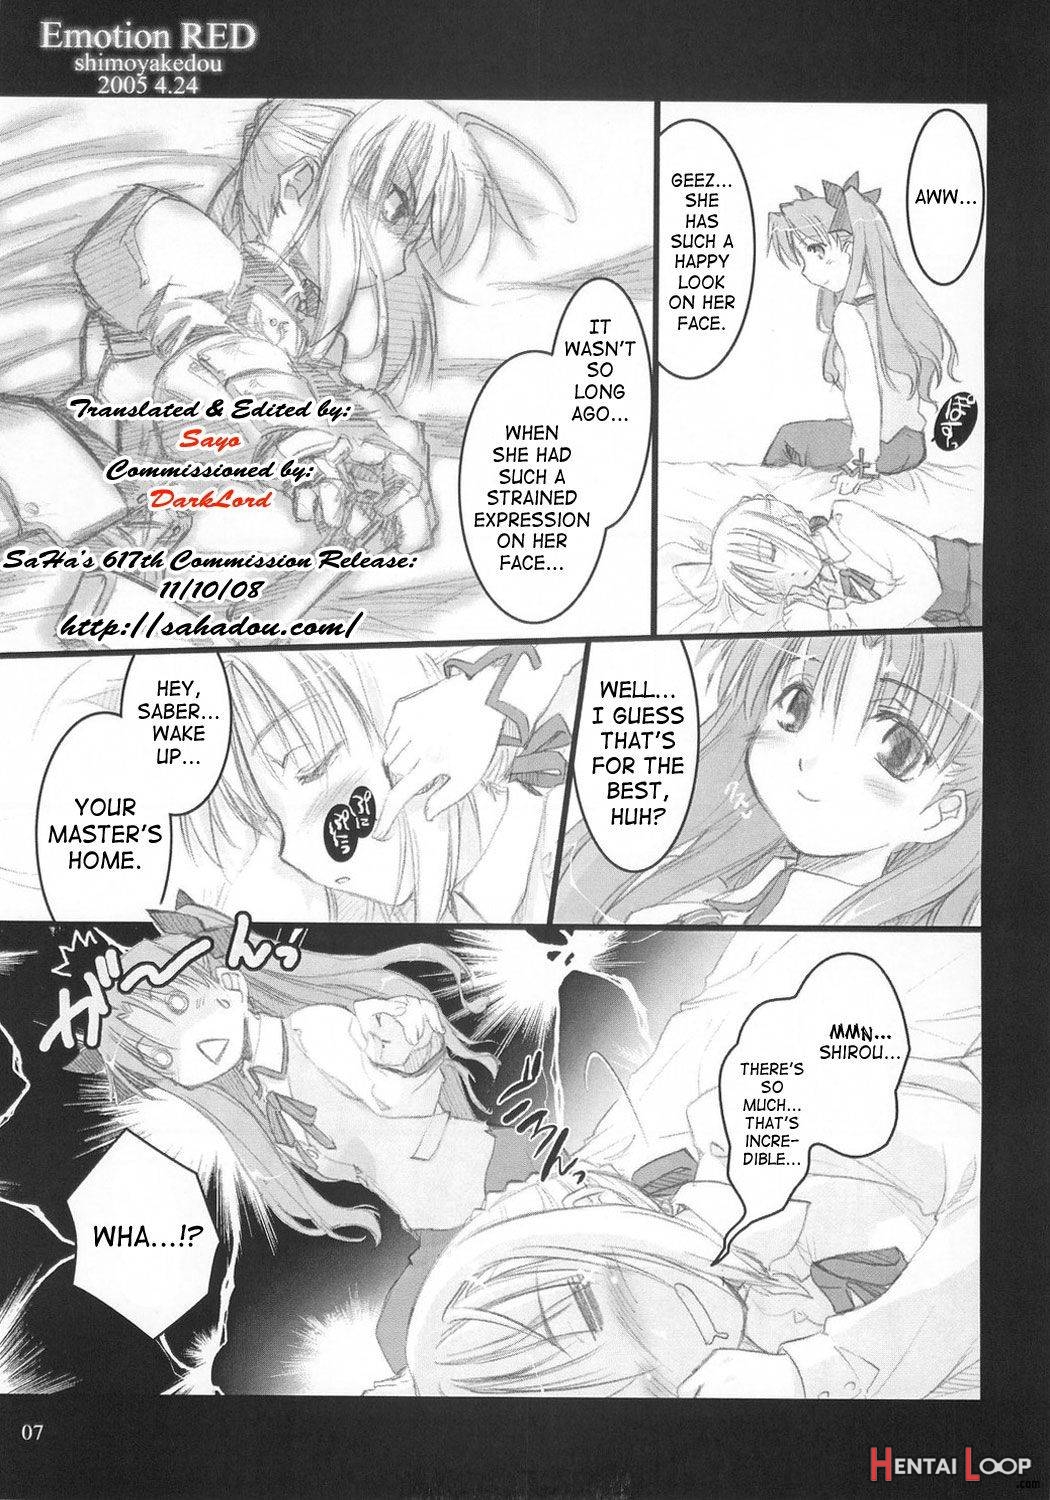 Emotion RED page 4